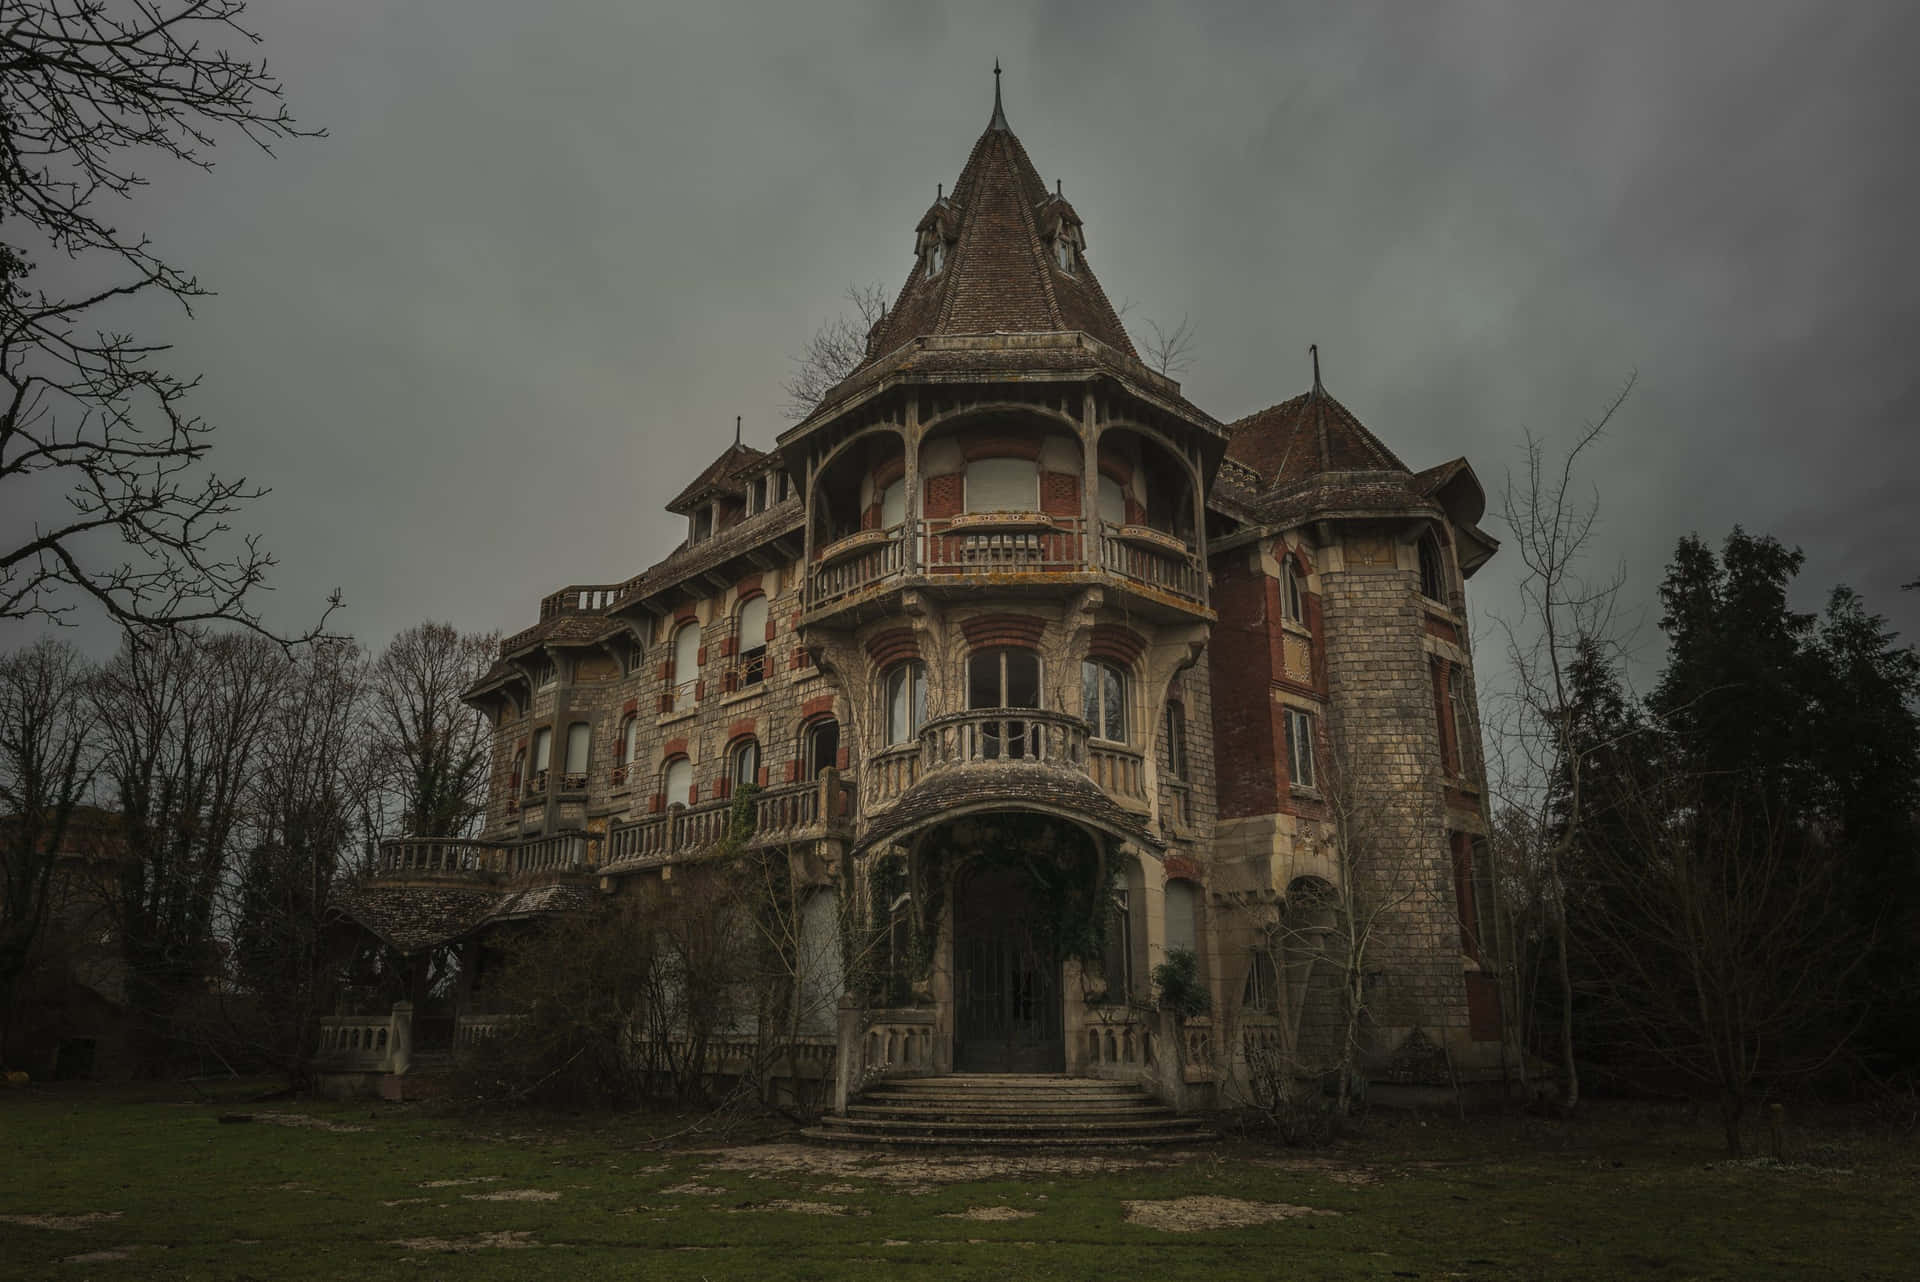 Explore the Spooky Abandoned Mansion